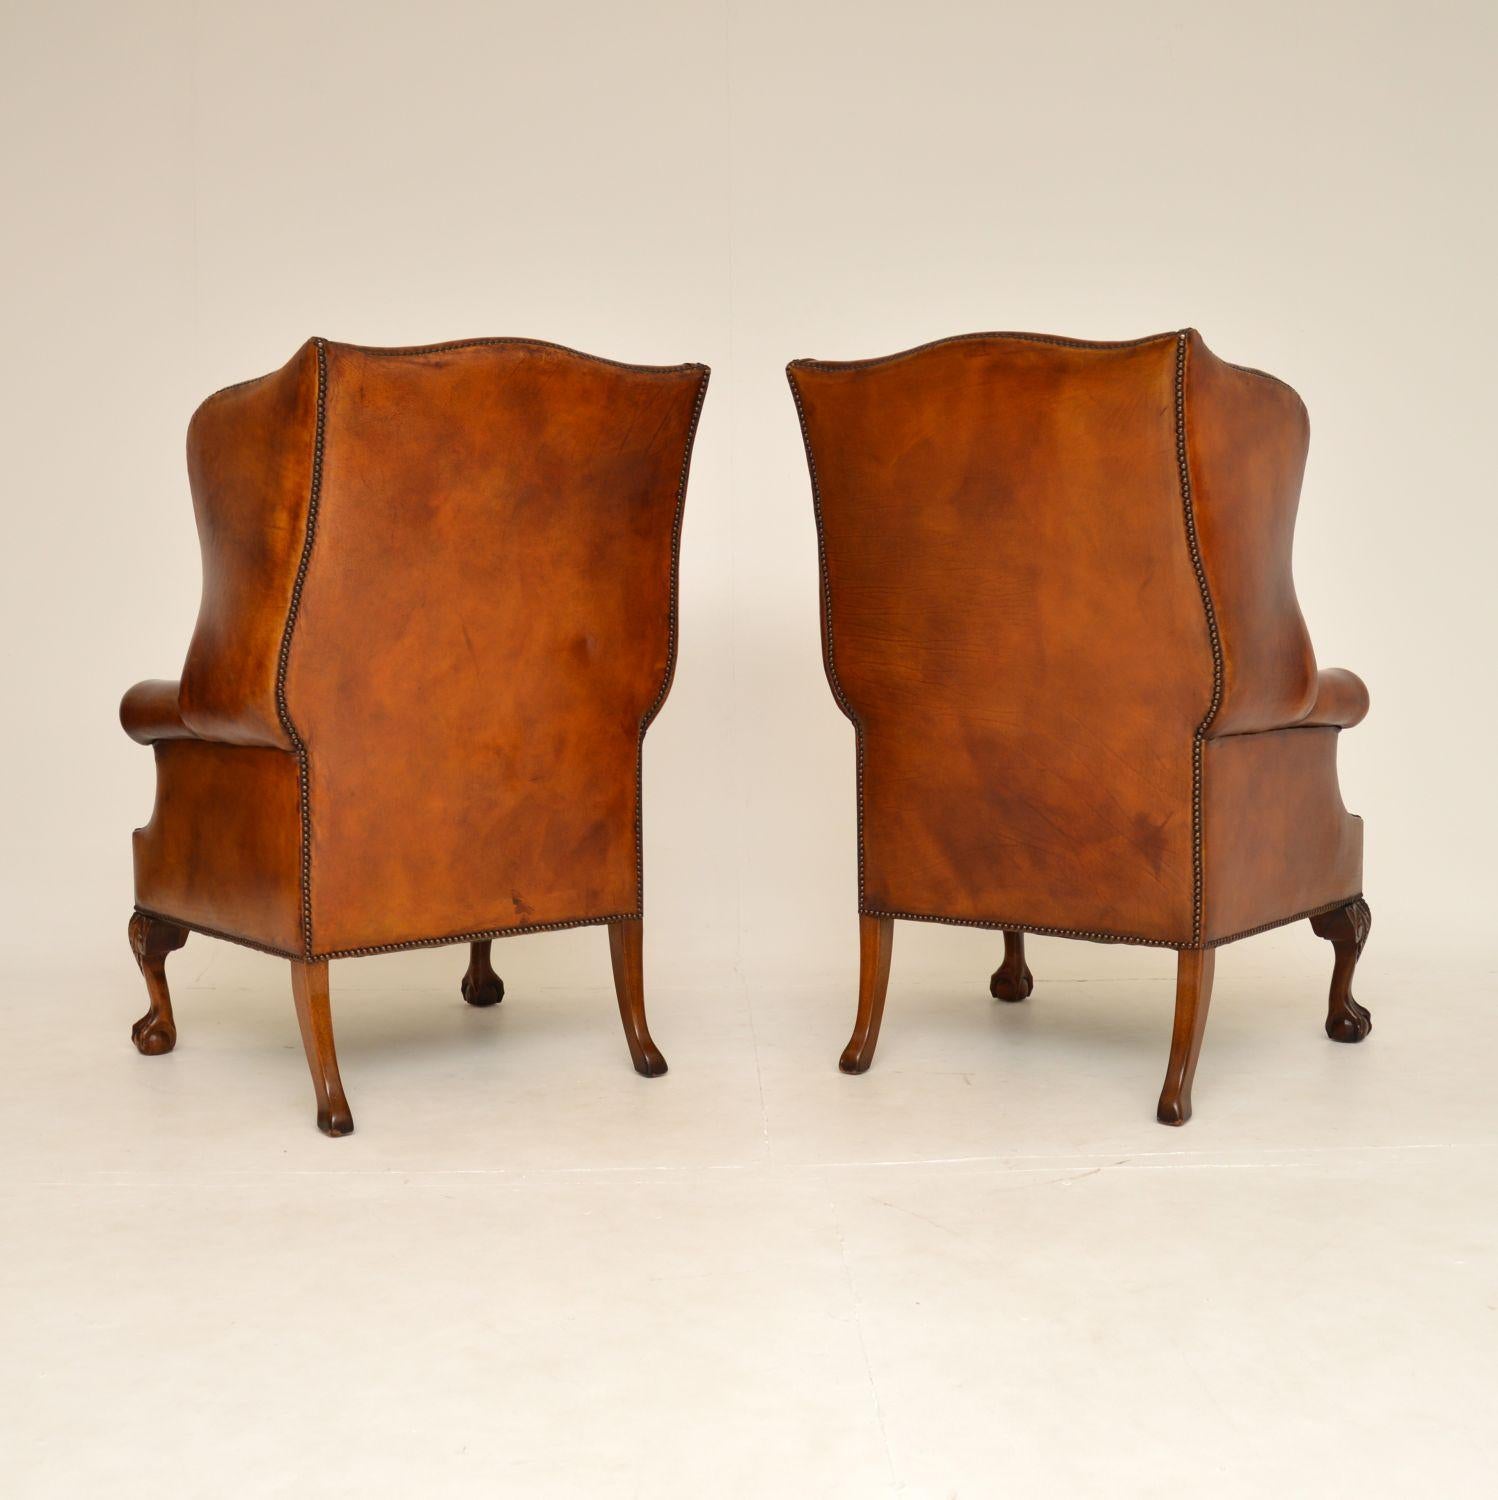 English Pair of Antique Georgian Style Leather Wing Back Armchairs